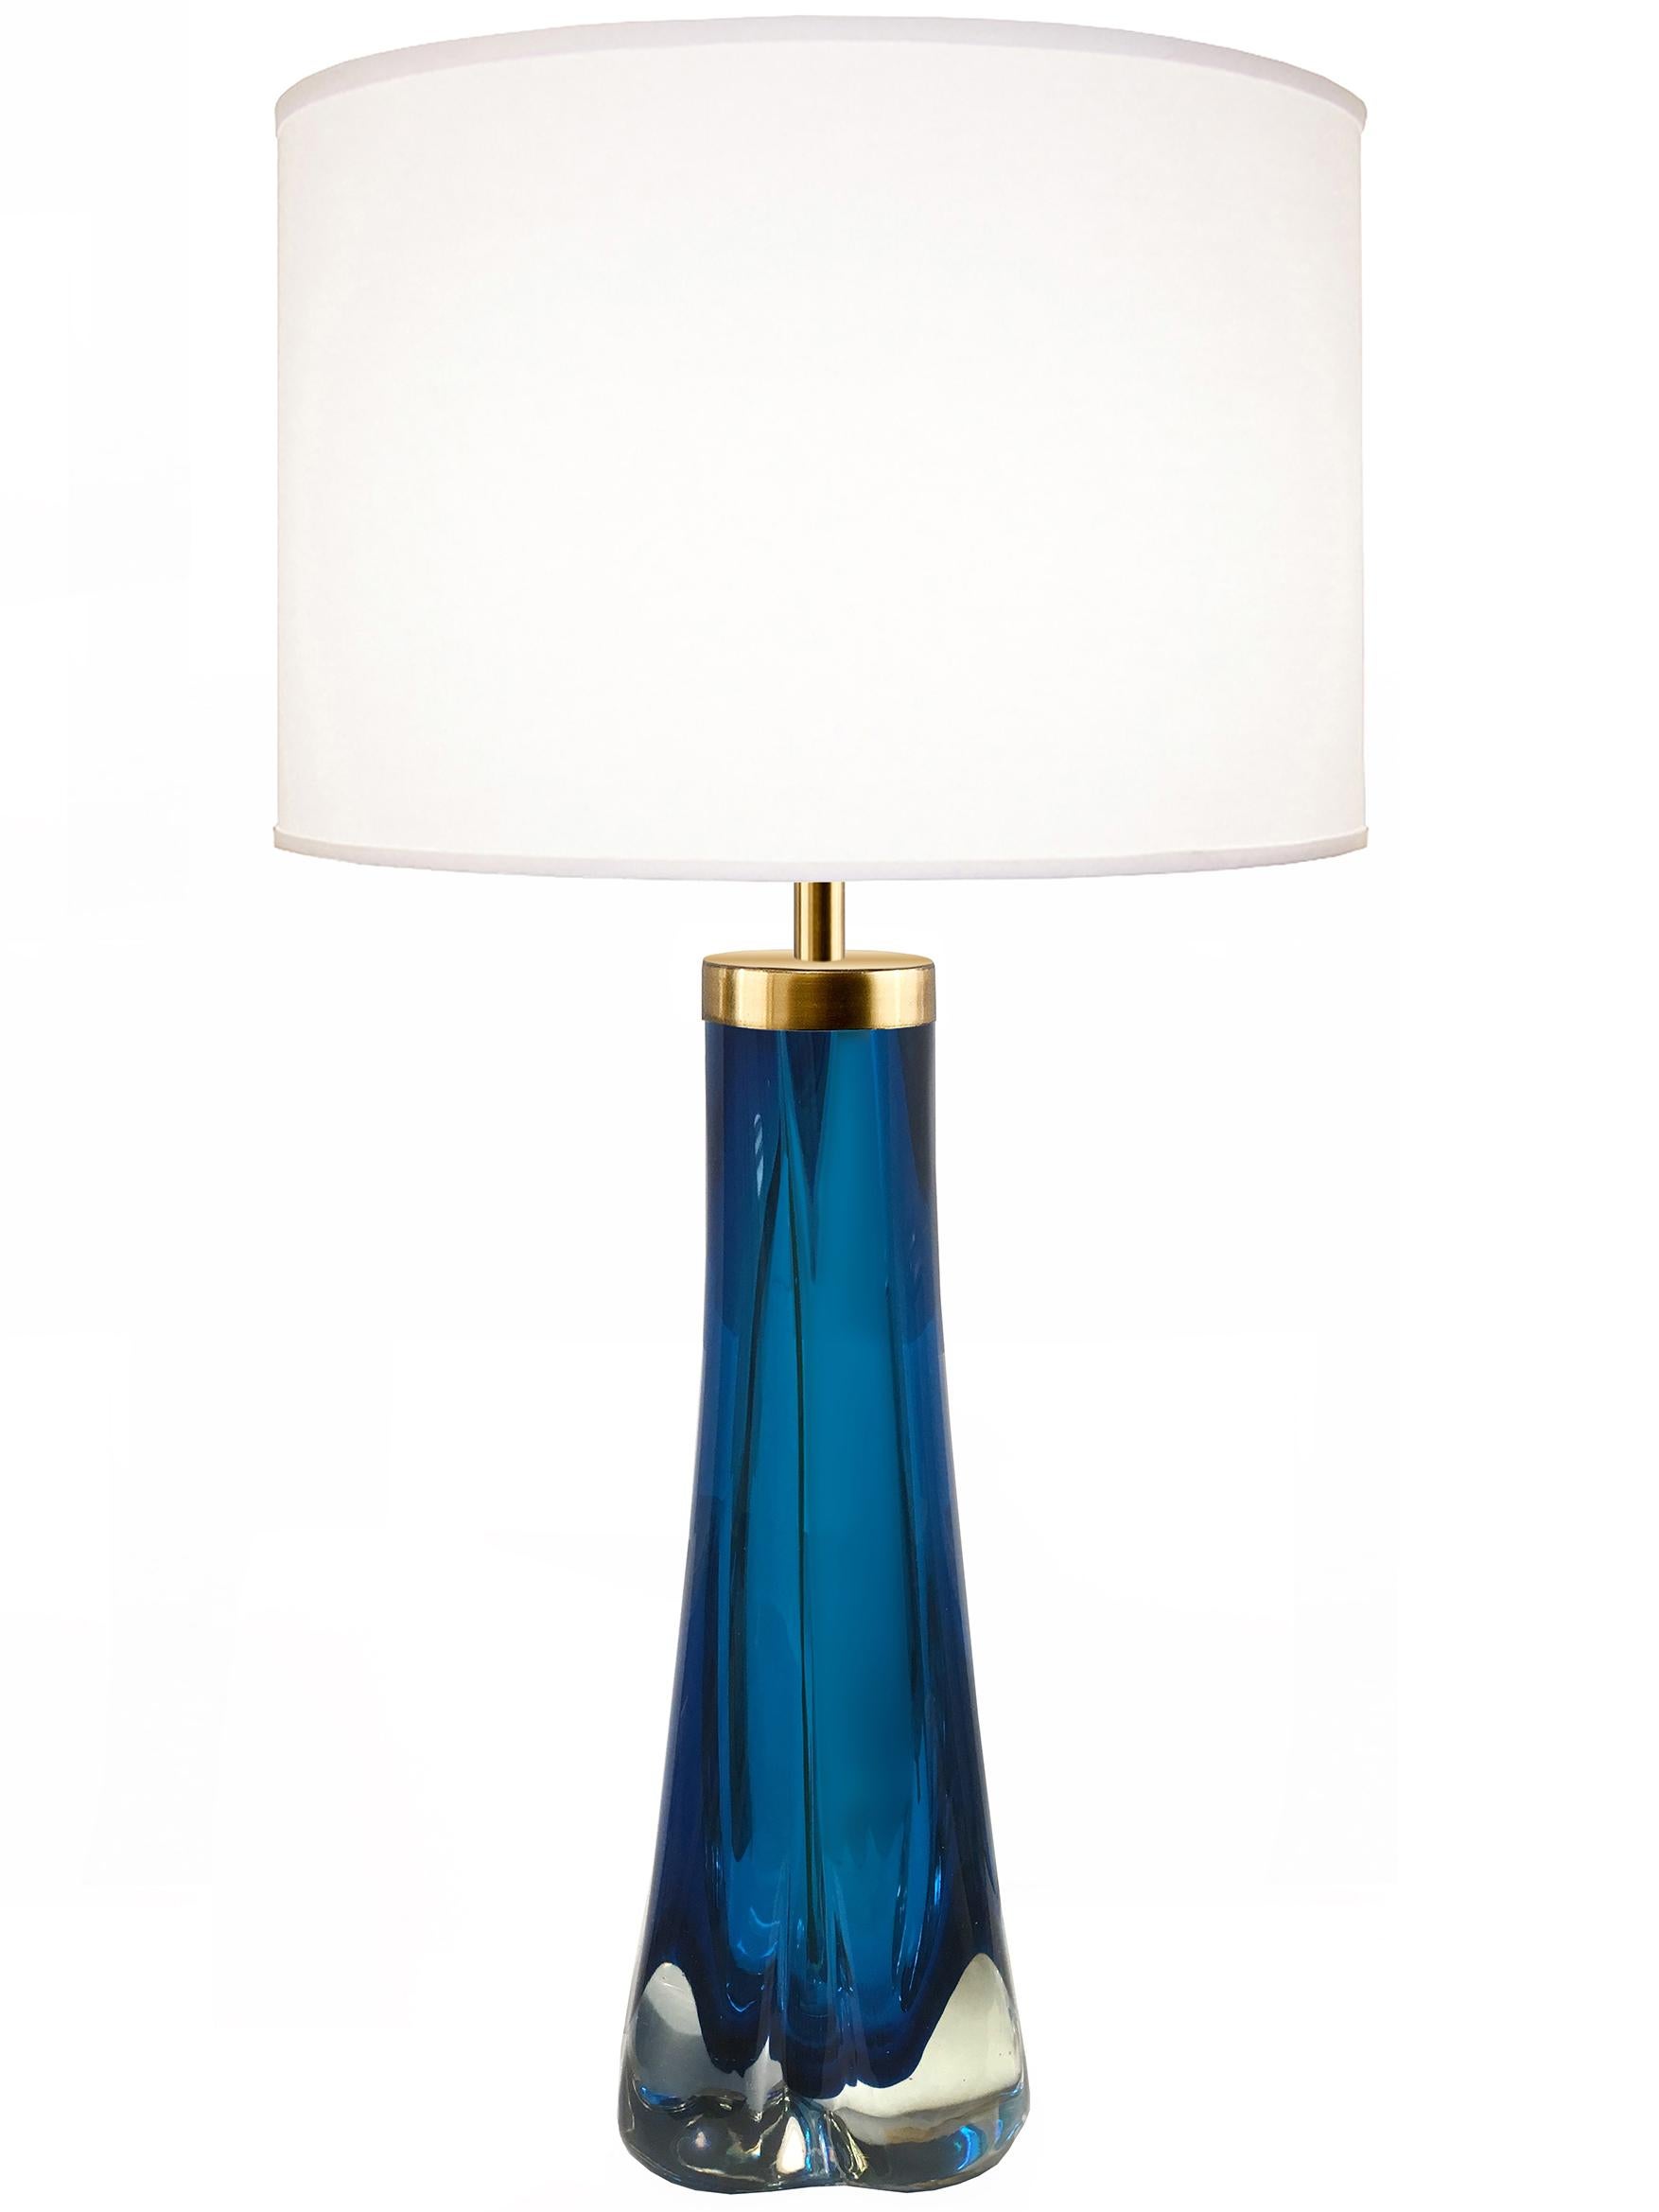 Italian Pair of Thick Cased Blue Glass Lamps from Craig Van Den Brulle to Order For Sale